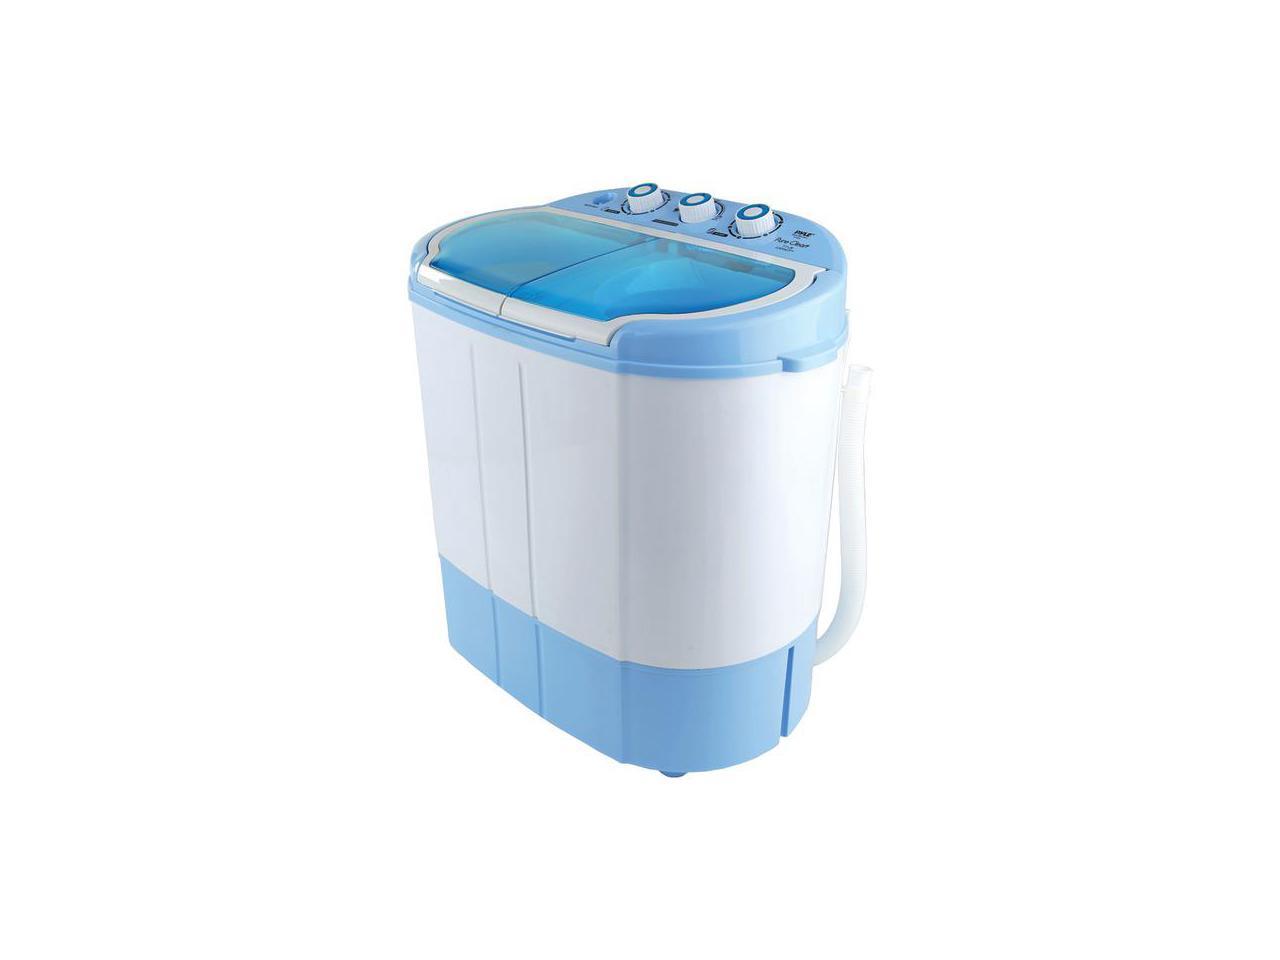 Pyle Compact & Portable Washing Machine with Mini Laundry Clothes Washer White 